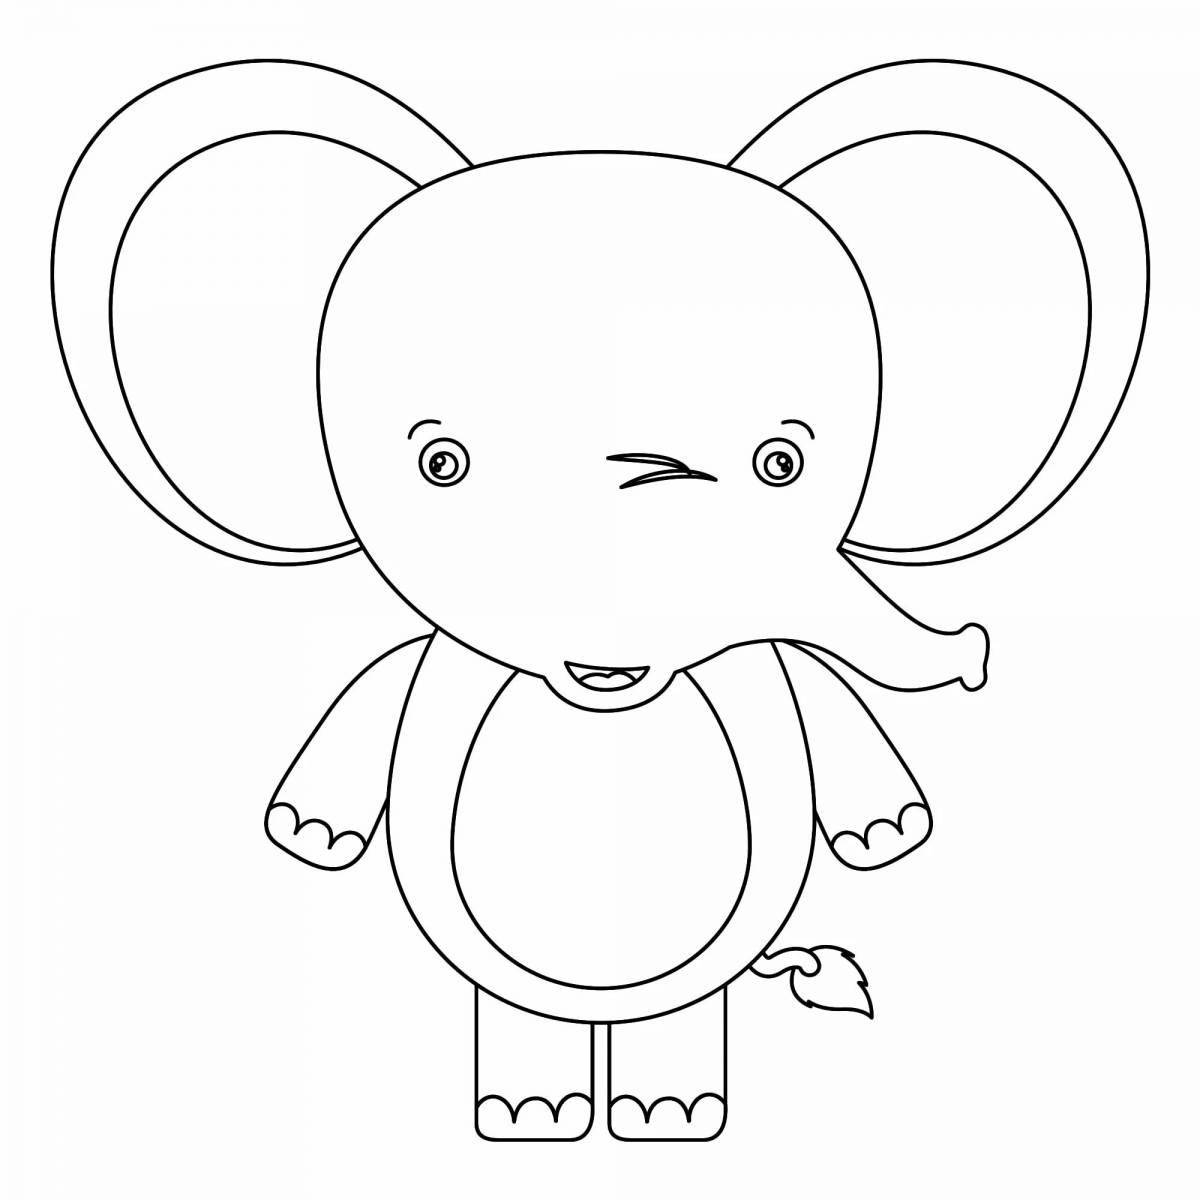 Elephant bright coloring for 3-4 year olds